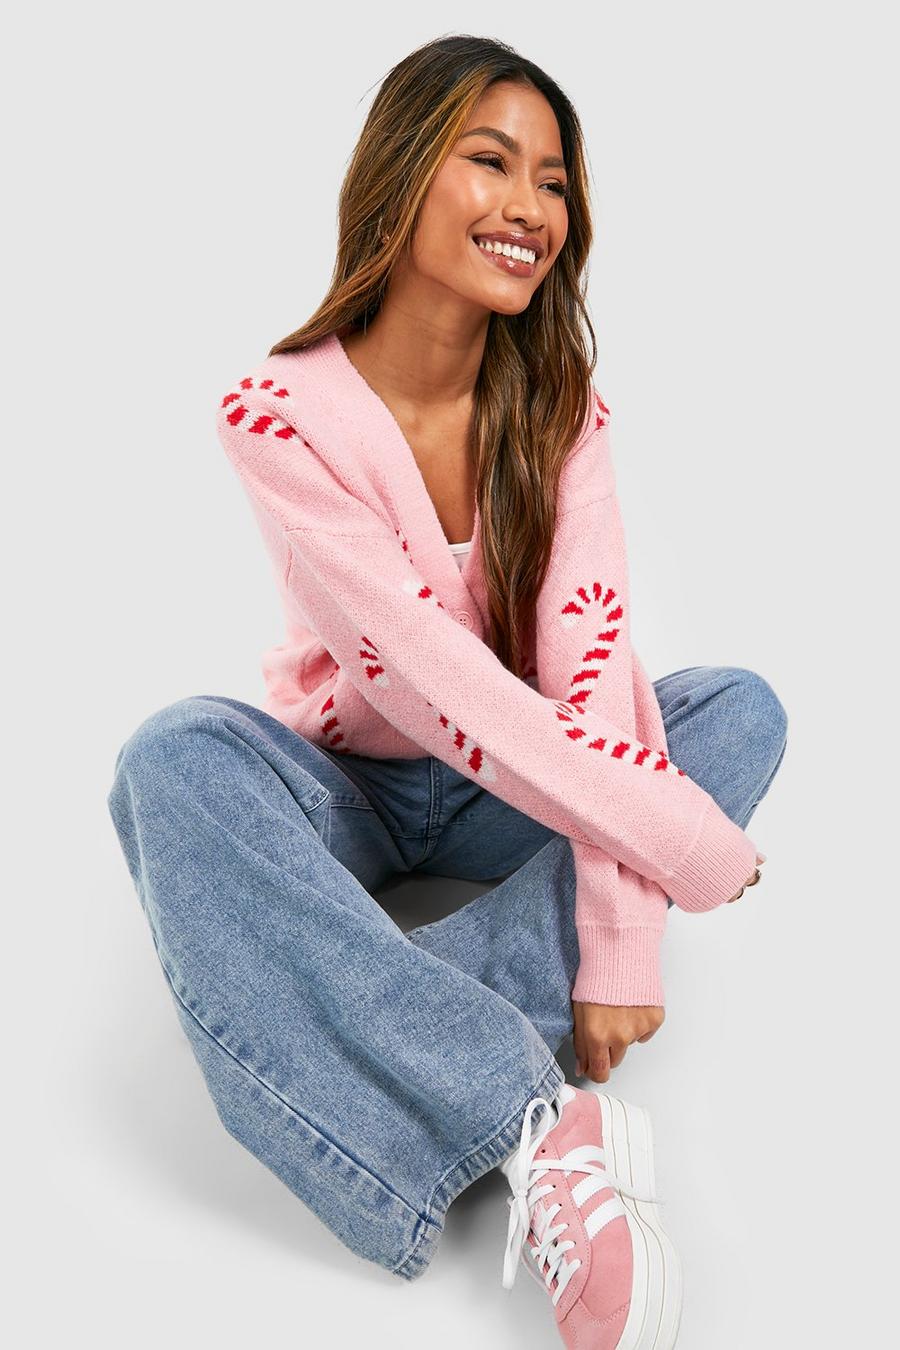 Soft pink Soft Knit Candy Cane Hearts Christmas Cardigan